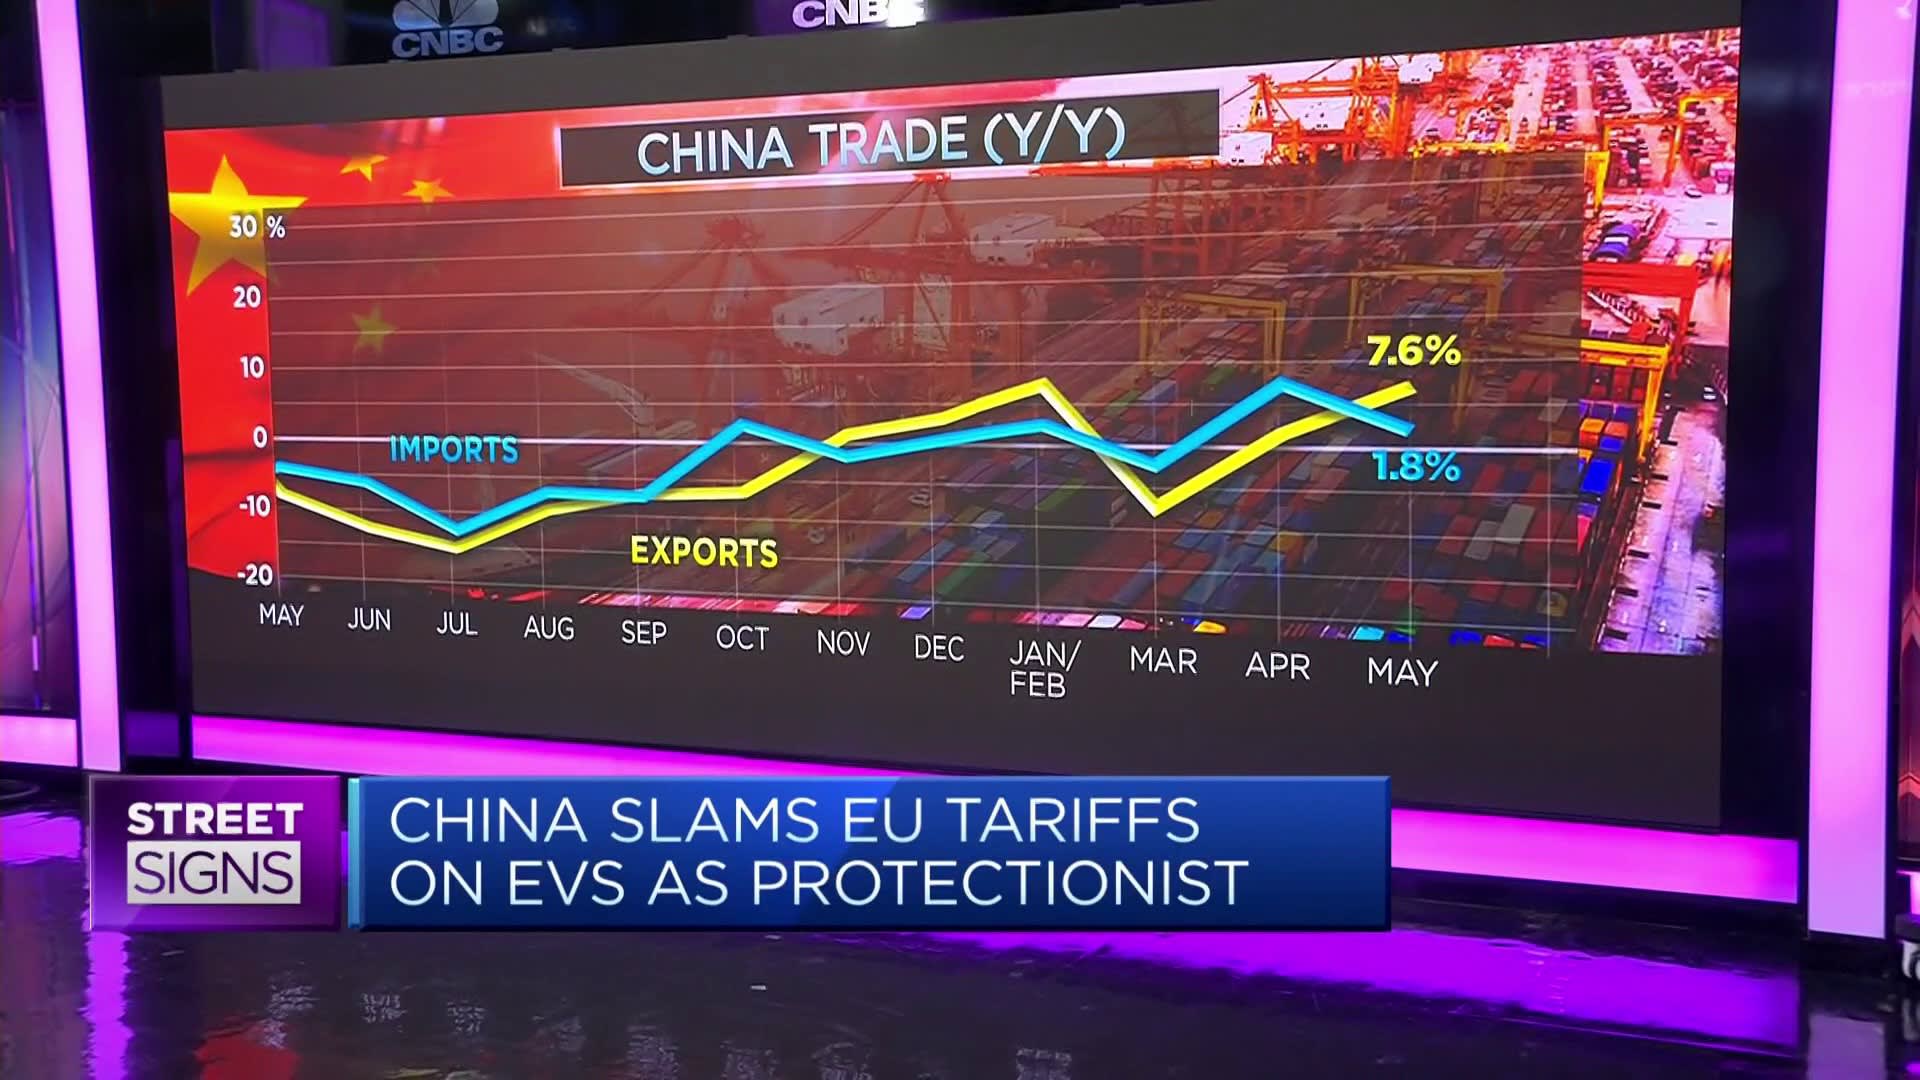 There's a risk of a global trade war starting in November if U.S. administration changes: Barclays